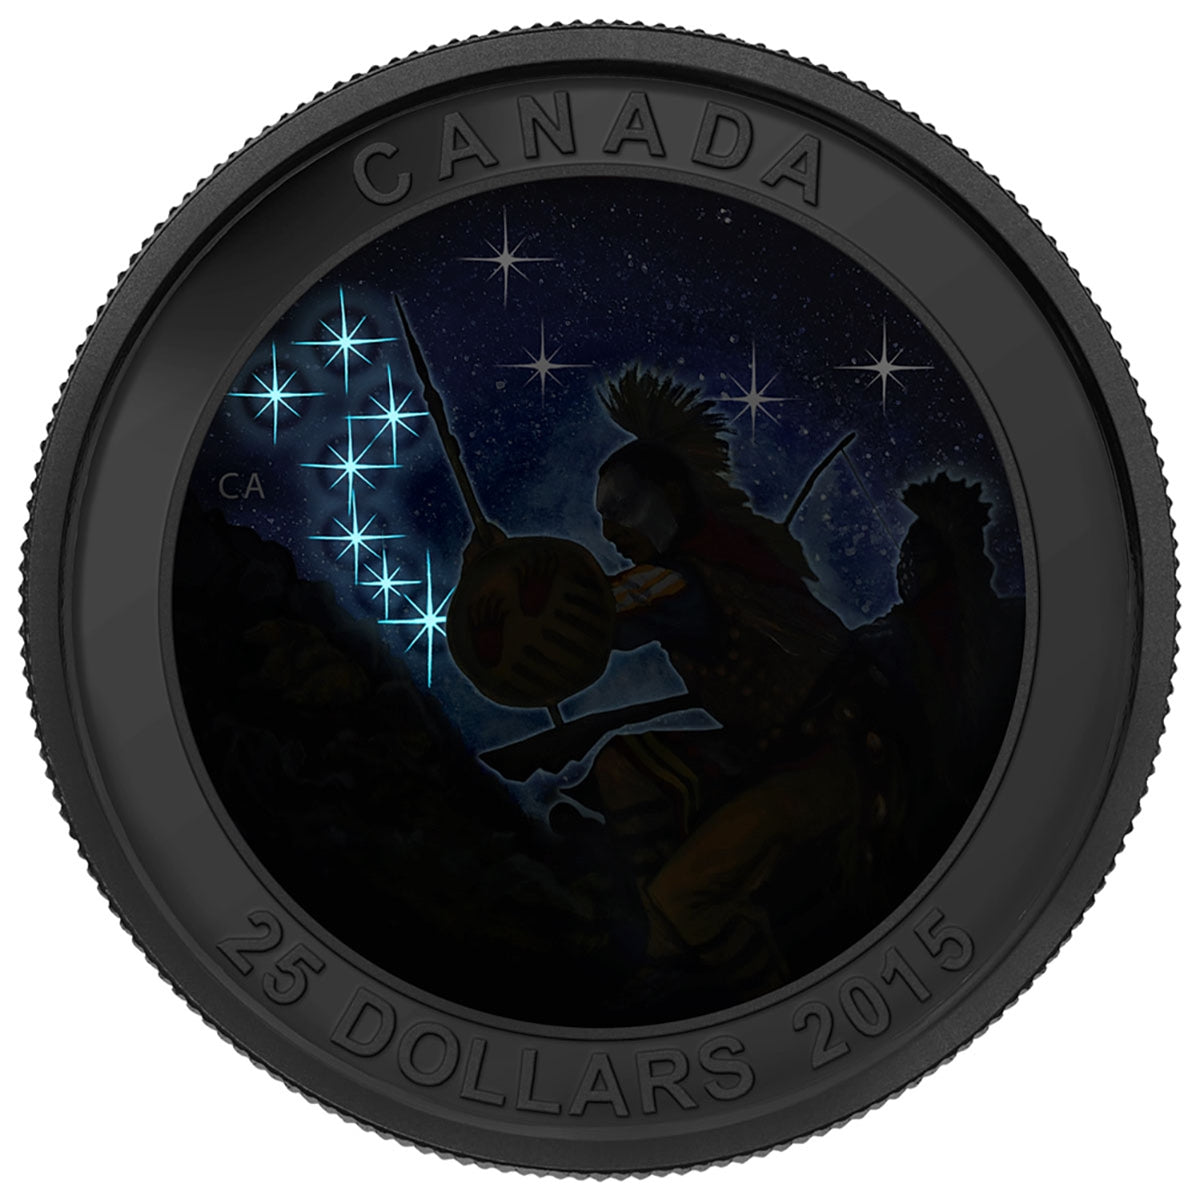 Fine Silver Glow-in-the-Dark Coin – Star Charts: The Wounded Bear – Mintage: 7,500 (2015)